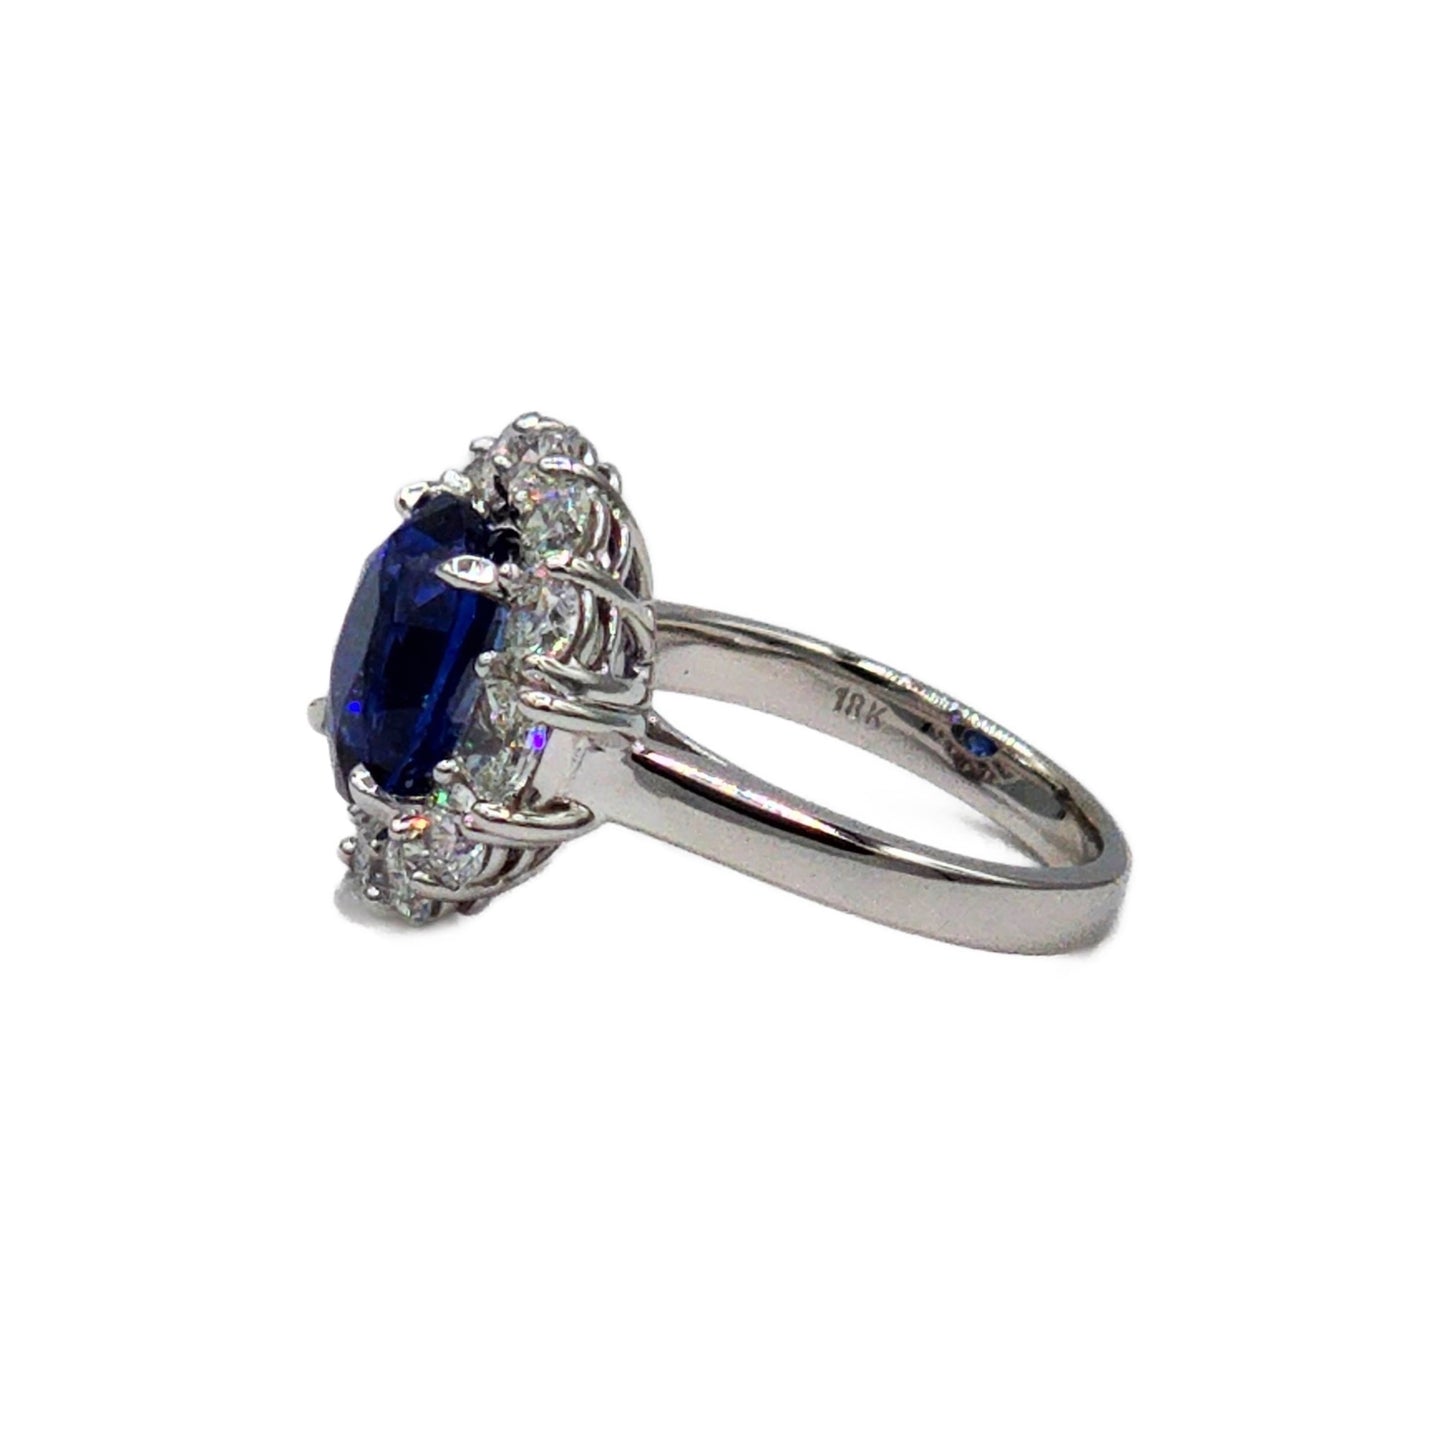 5.04 Carat Blue Sapphire and 2.02 Carat Total Weight Diamond Ring in 18K